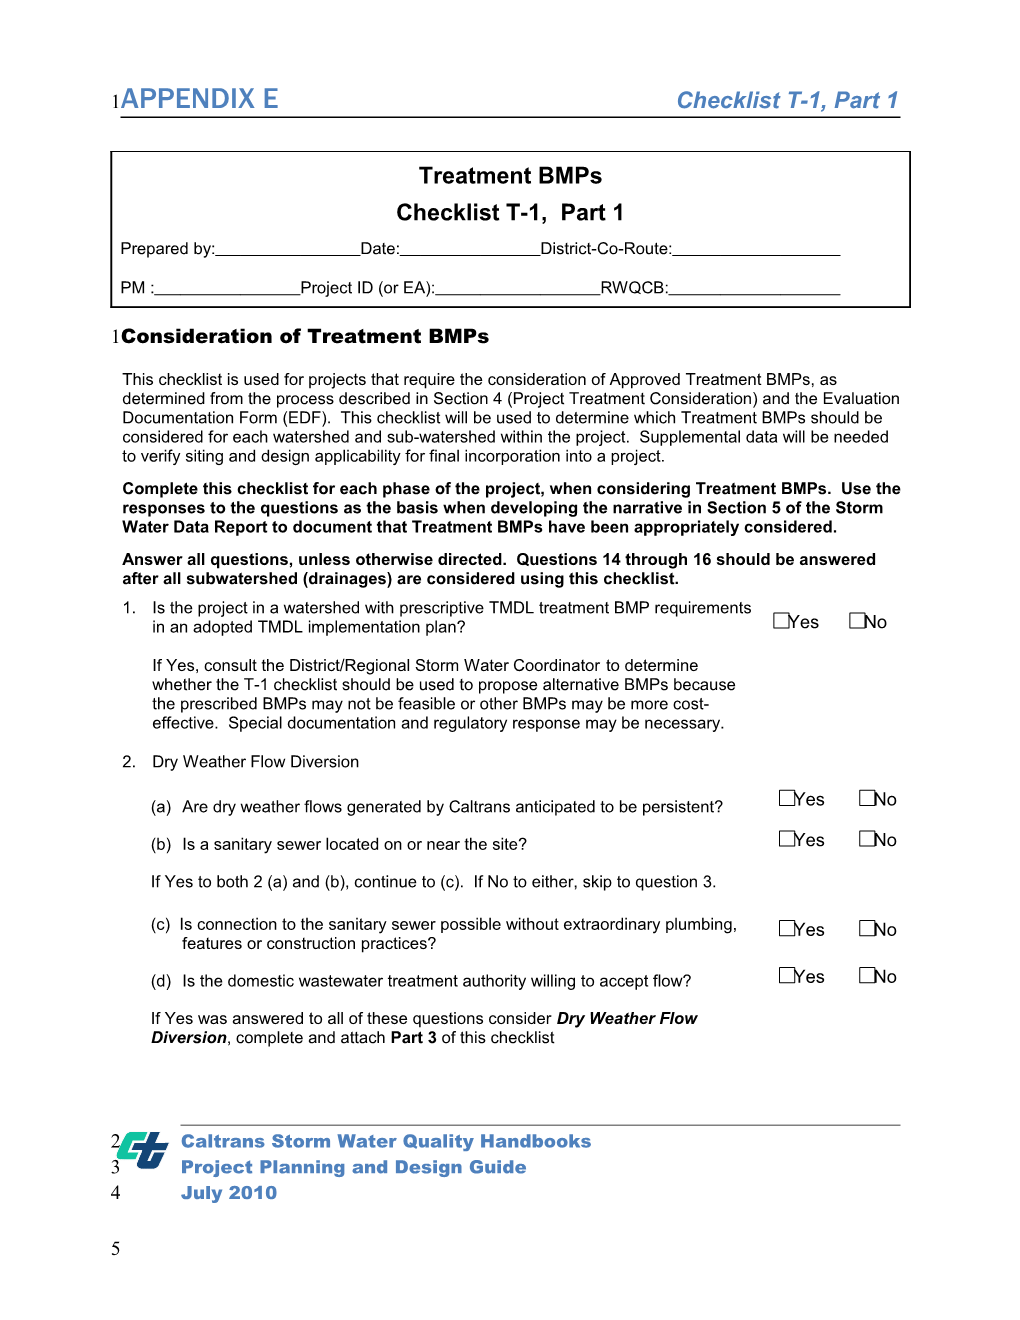 Consideration of Treatment Bmps